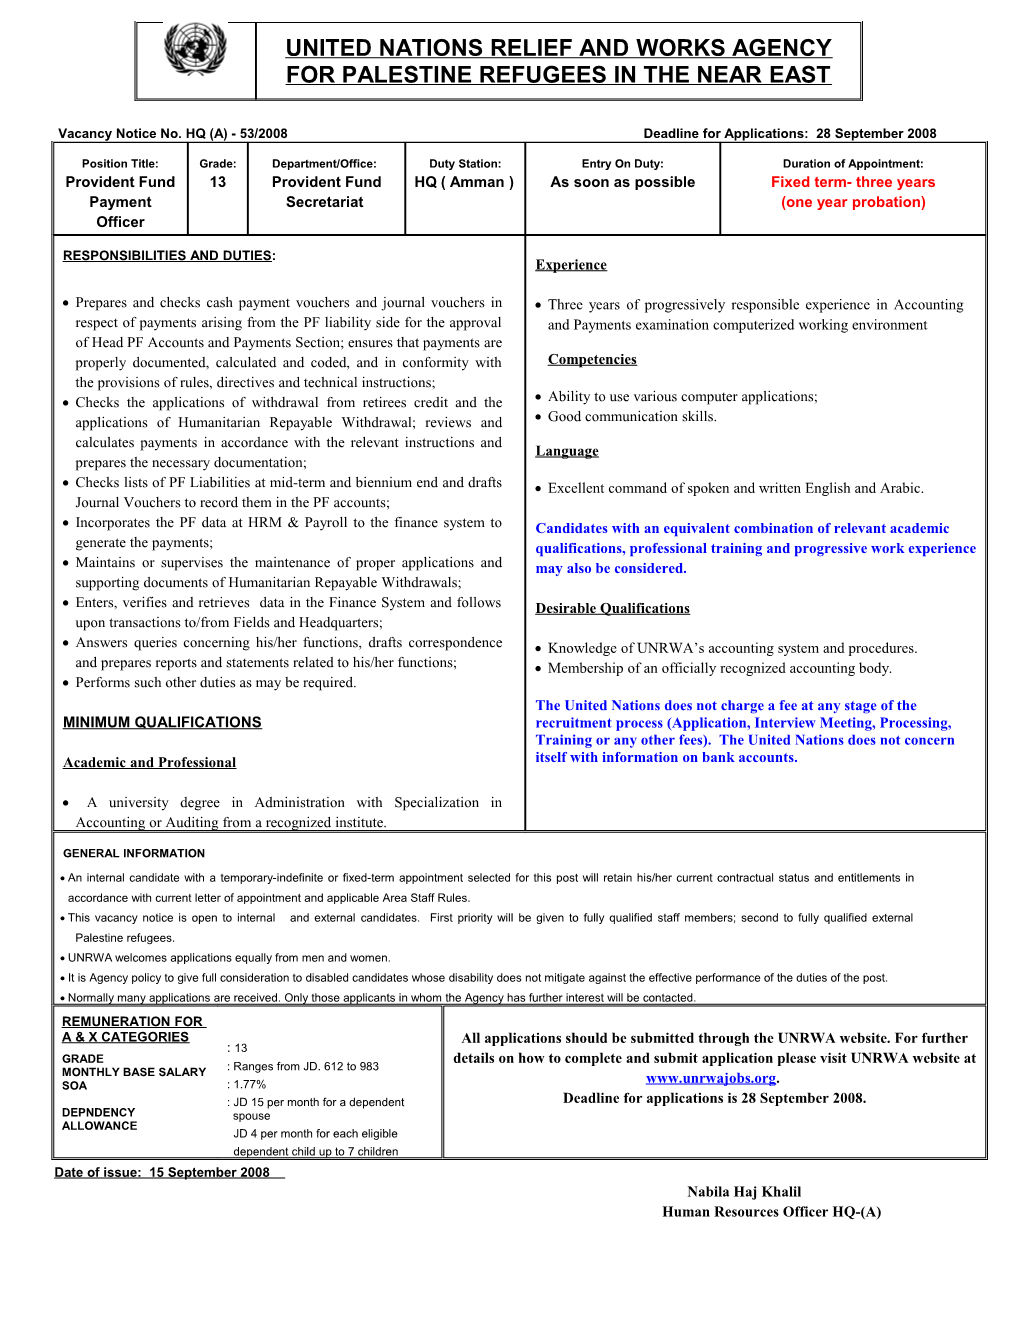 Vacancy Notice No.HQ (A) - 53/2008 Deadline for Applications: 28September 2008